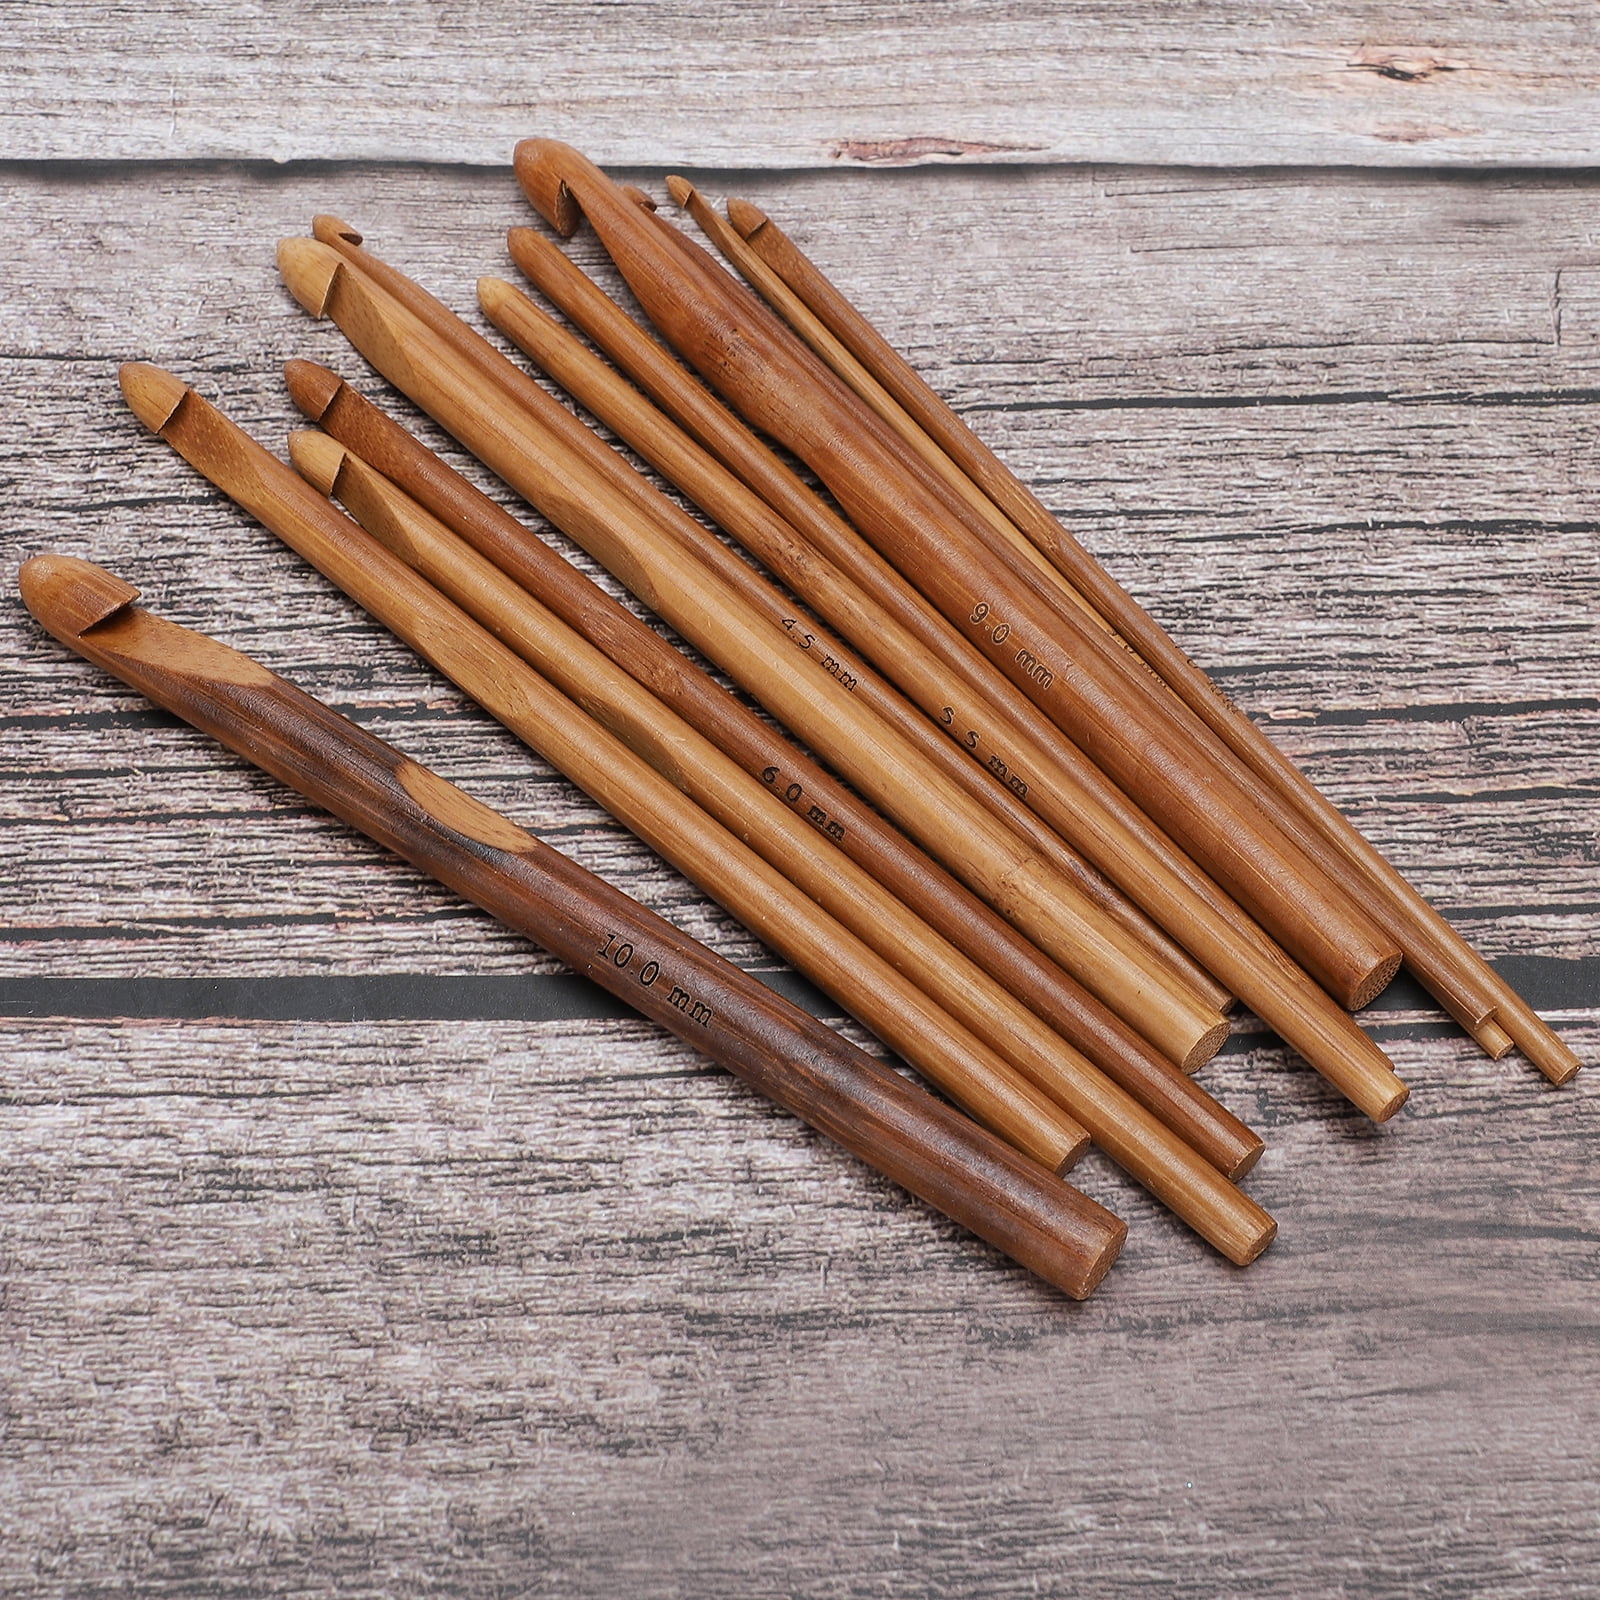 A New Heartsease - Caring For Bamboo and Wooden Knitting Needles